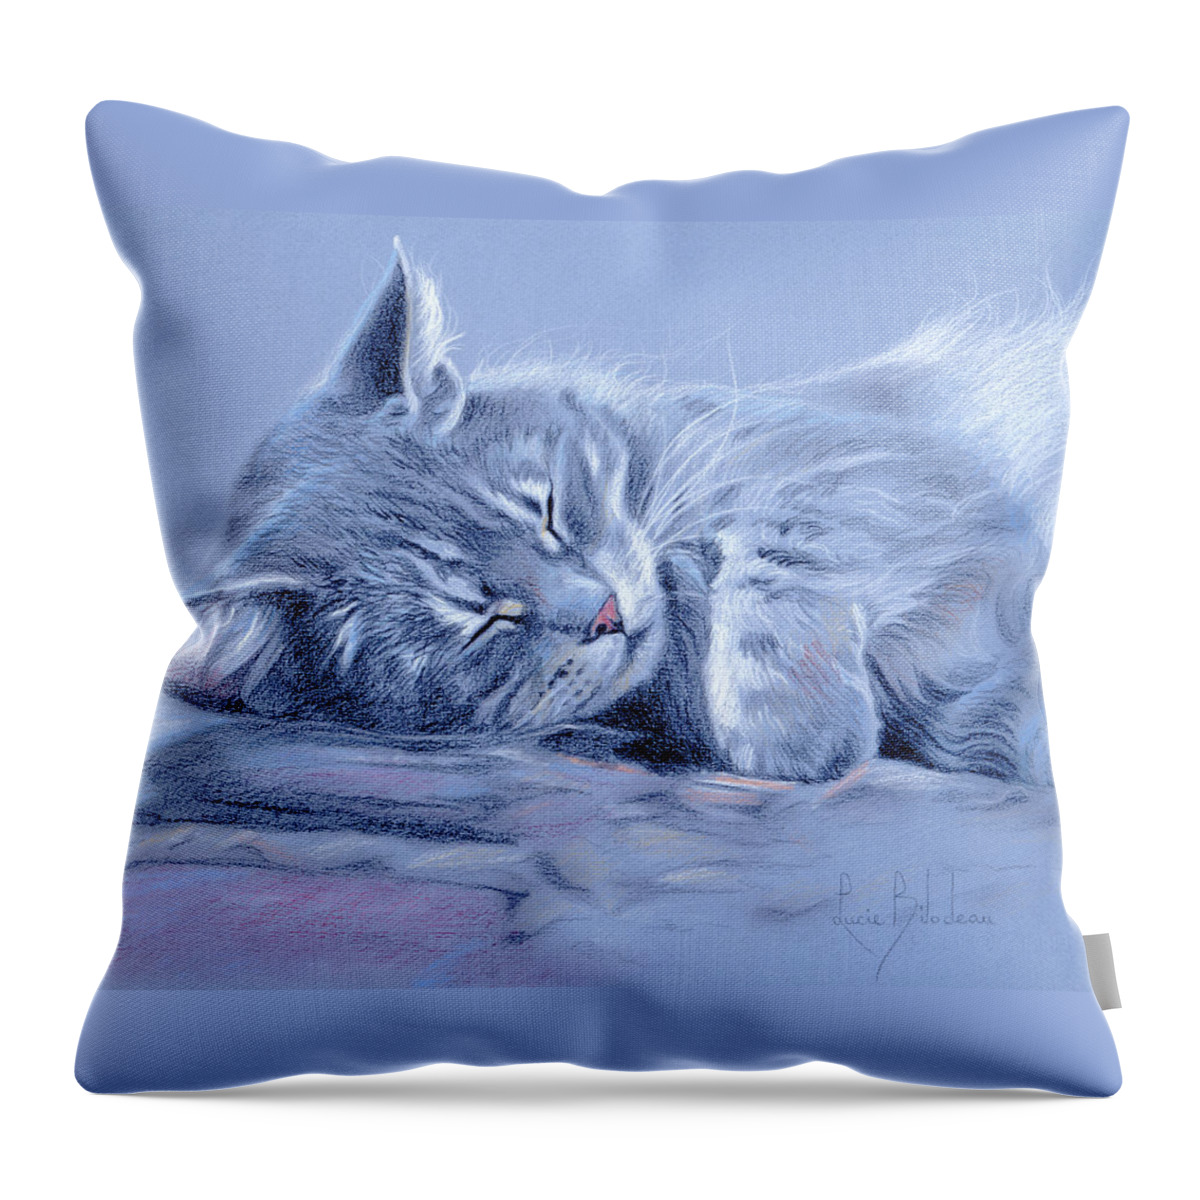 Cat Throw Pillow featuring the drawing Asleep by Lucie Bilodeau